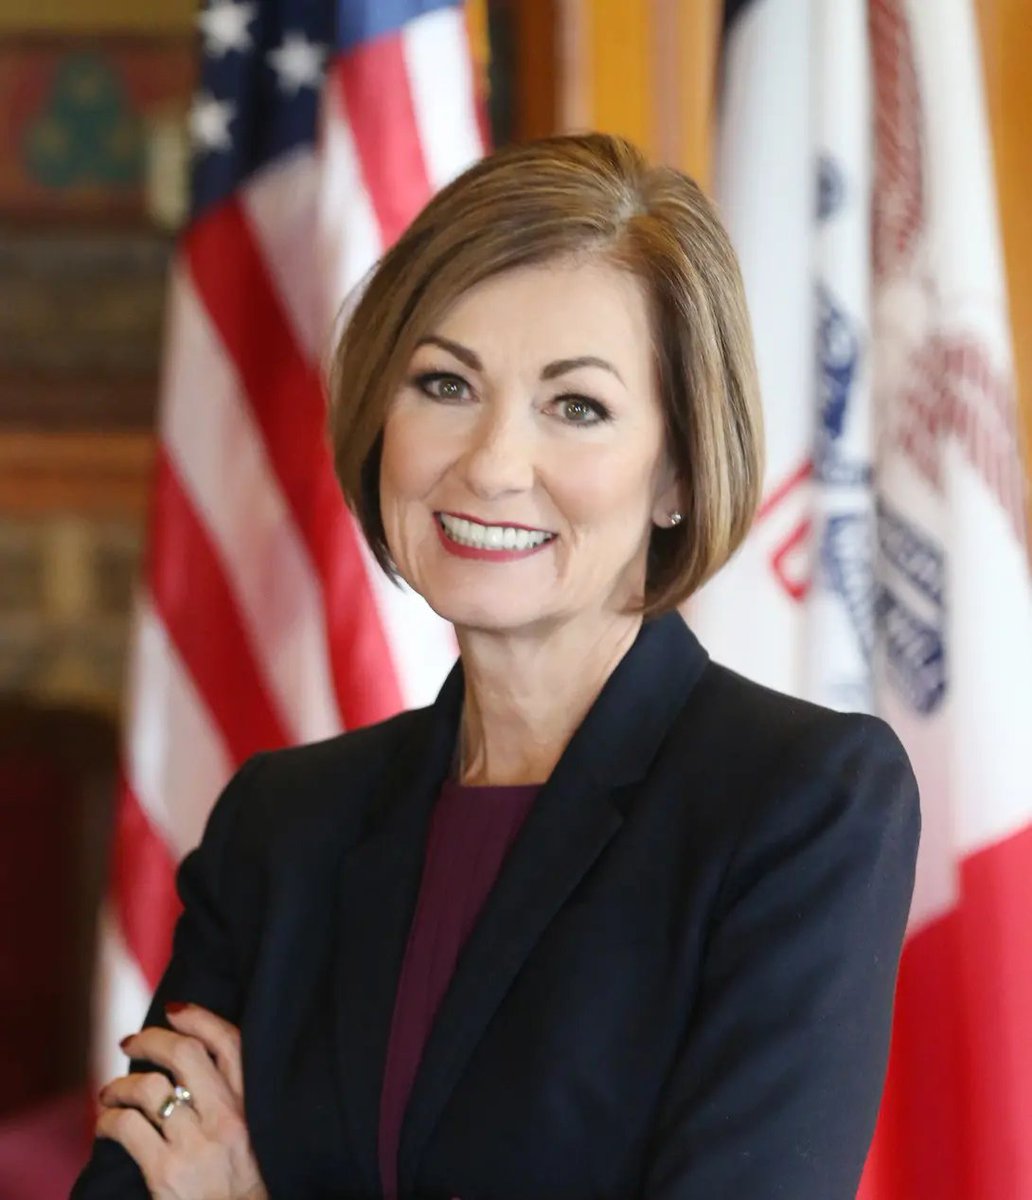 Gov. Kim Reynolds has signed a Texas-style immigration law allowing Iowa officers to arrest undocumented immigrants under a new crime of 'illegal reentry' into the state.'

Republicans are taking steps to interfere with immigration. Do you support that?💯